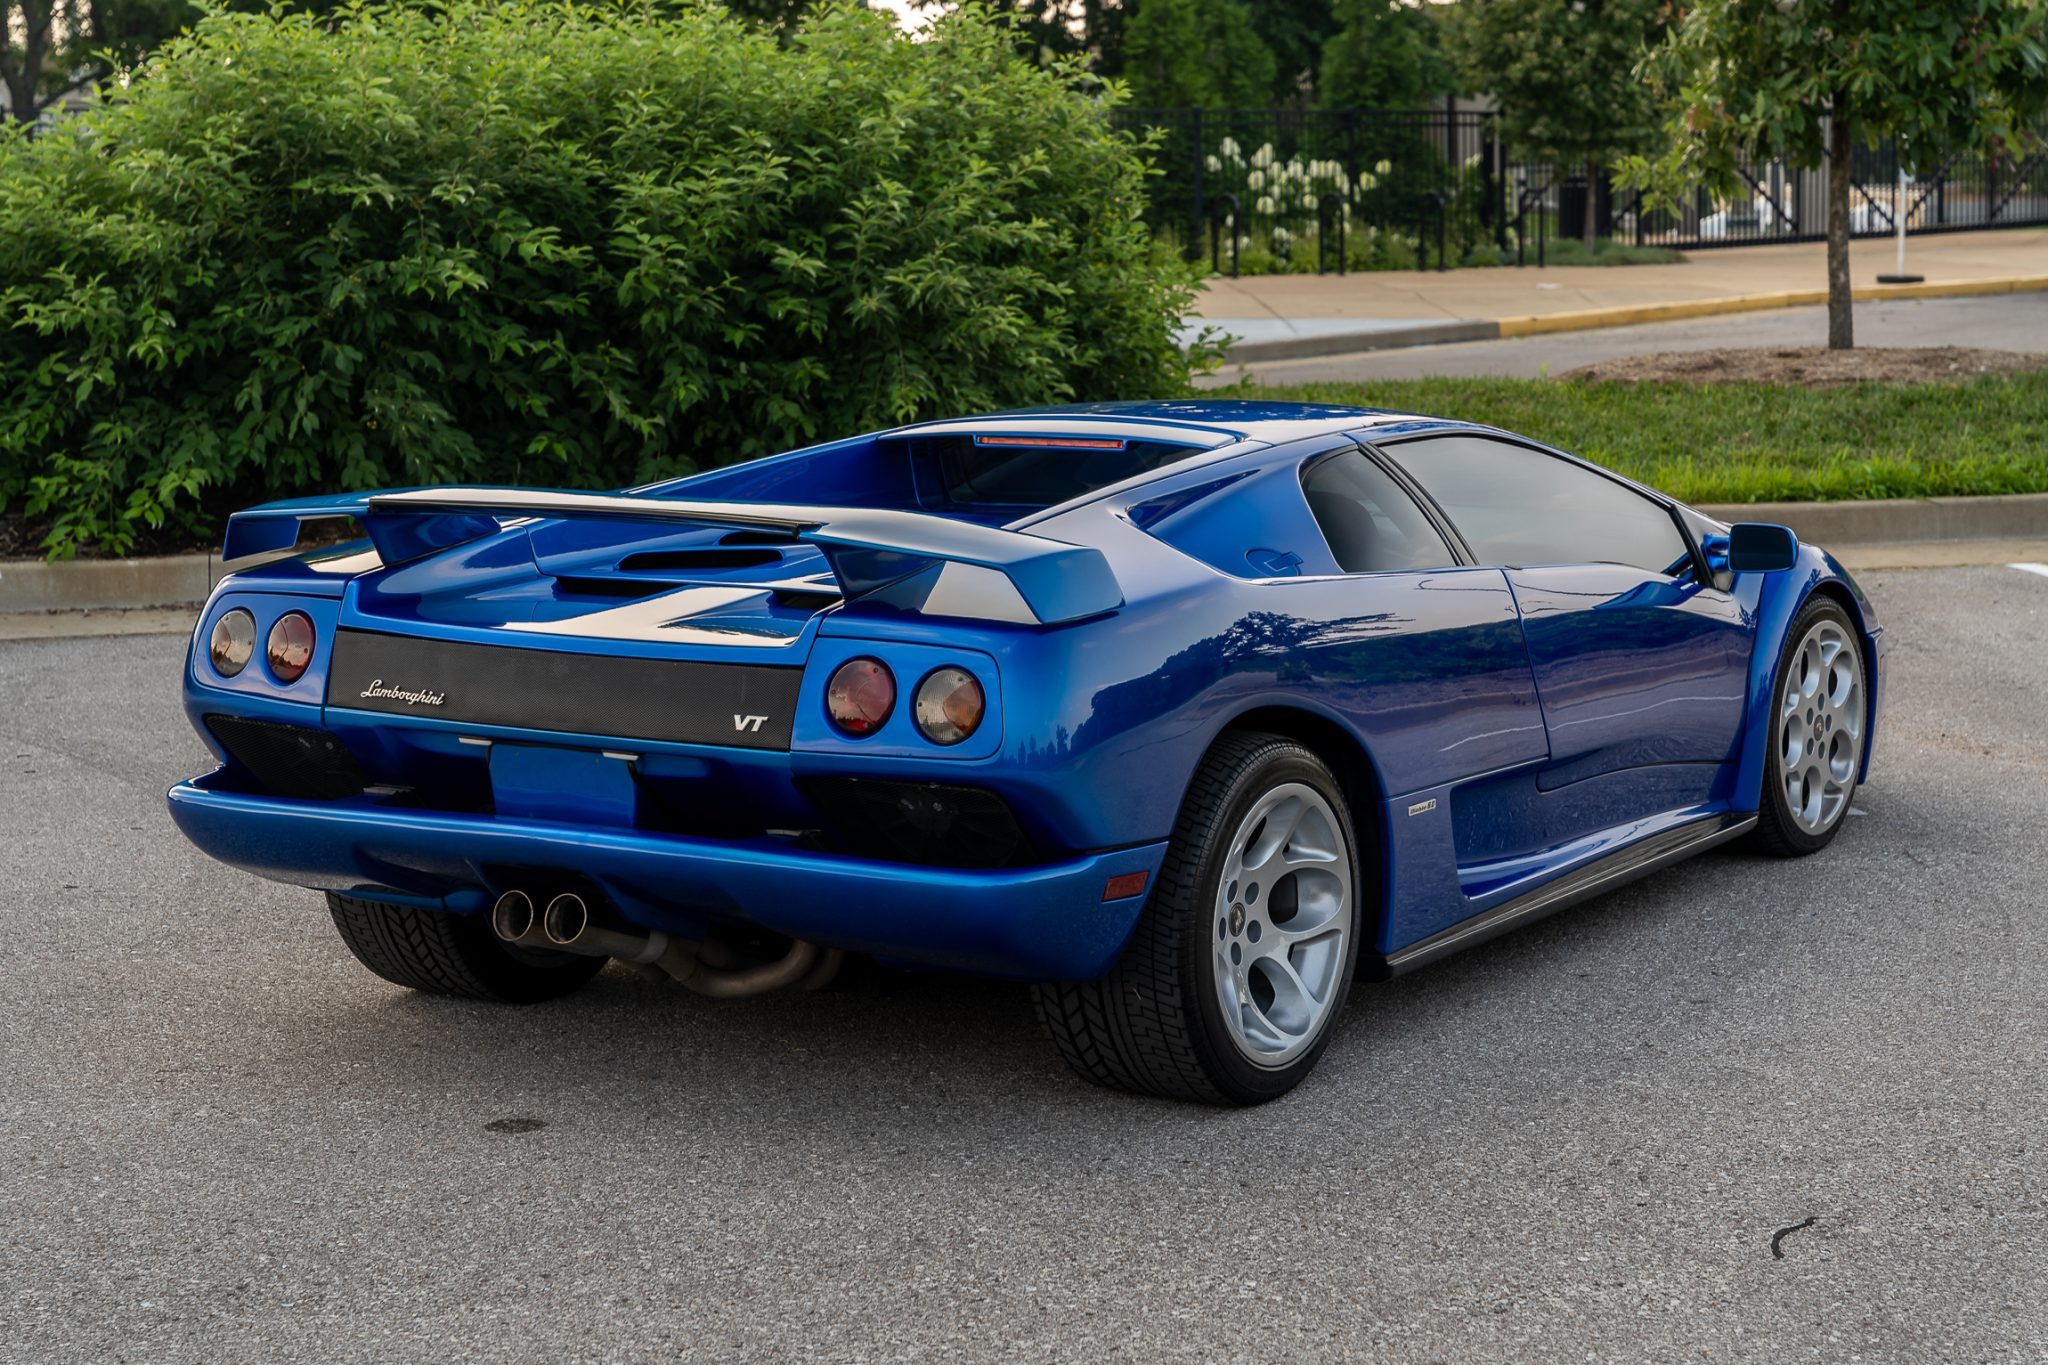 Monterey Blue 2001 Lamborghini Diablo VT  Is Dripping With Sex Appeal |  Carscoops